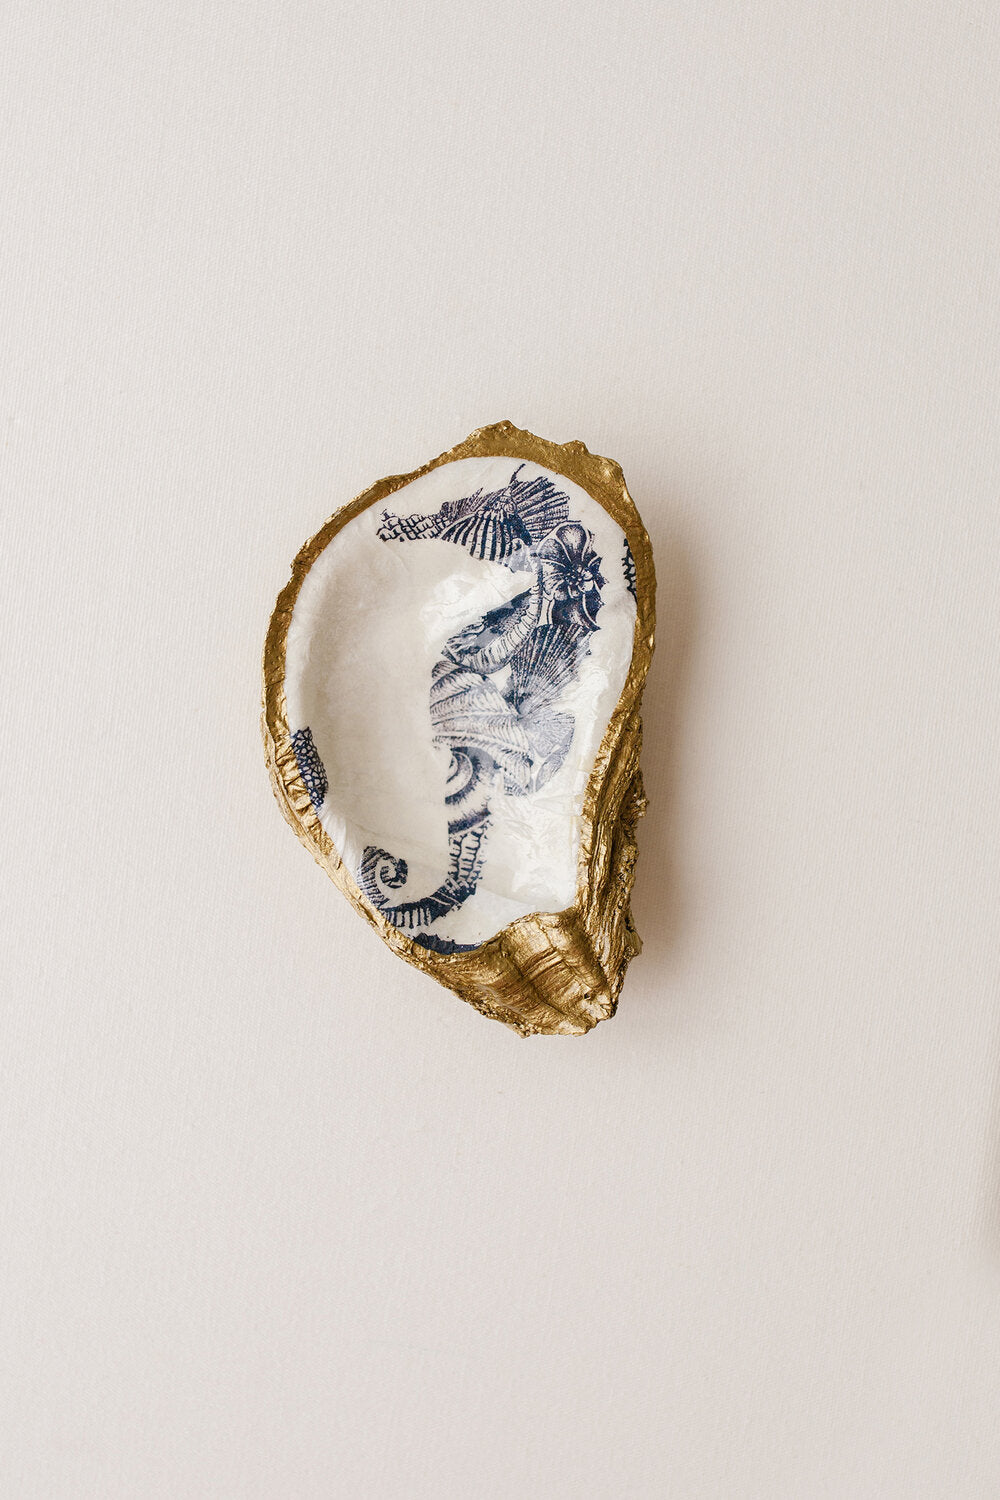 Grits & Grace painted oyster - Indigo Seahorse